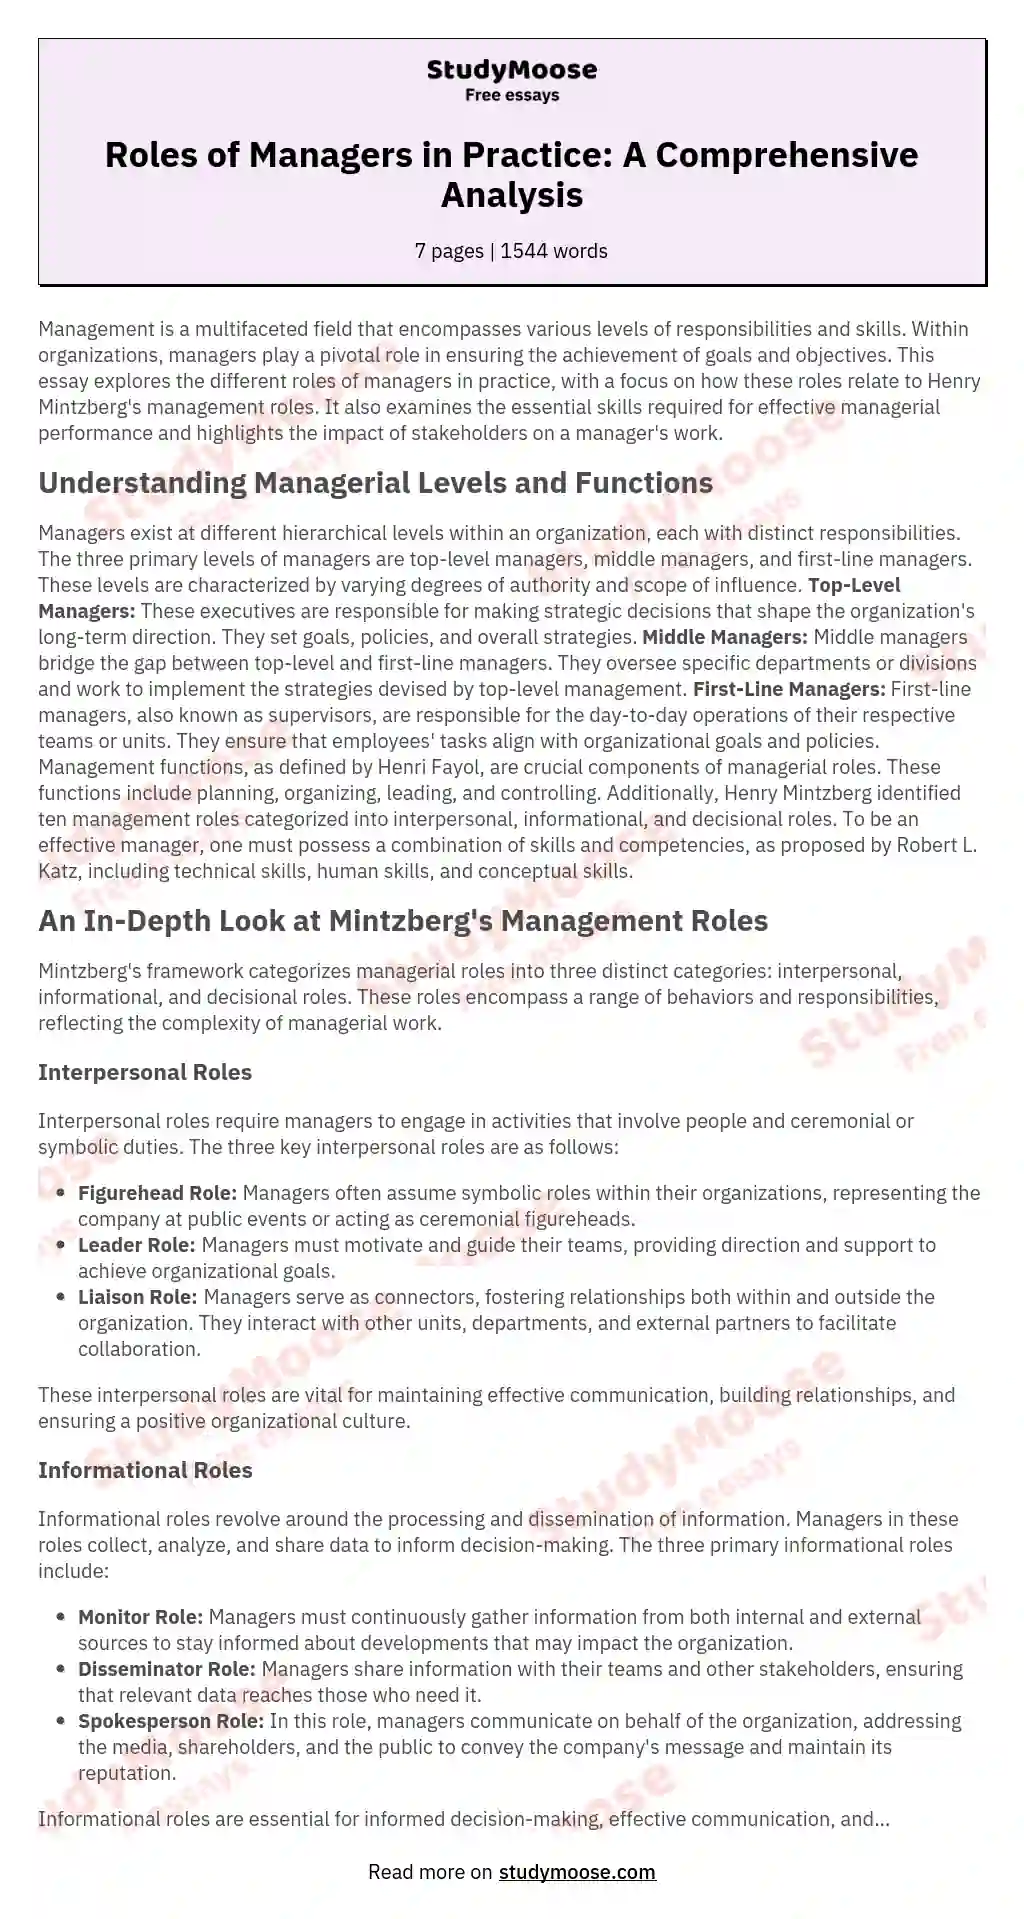 Roles of Managers in Practice: A Comprehensive Analysis essay